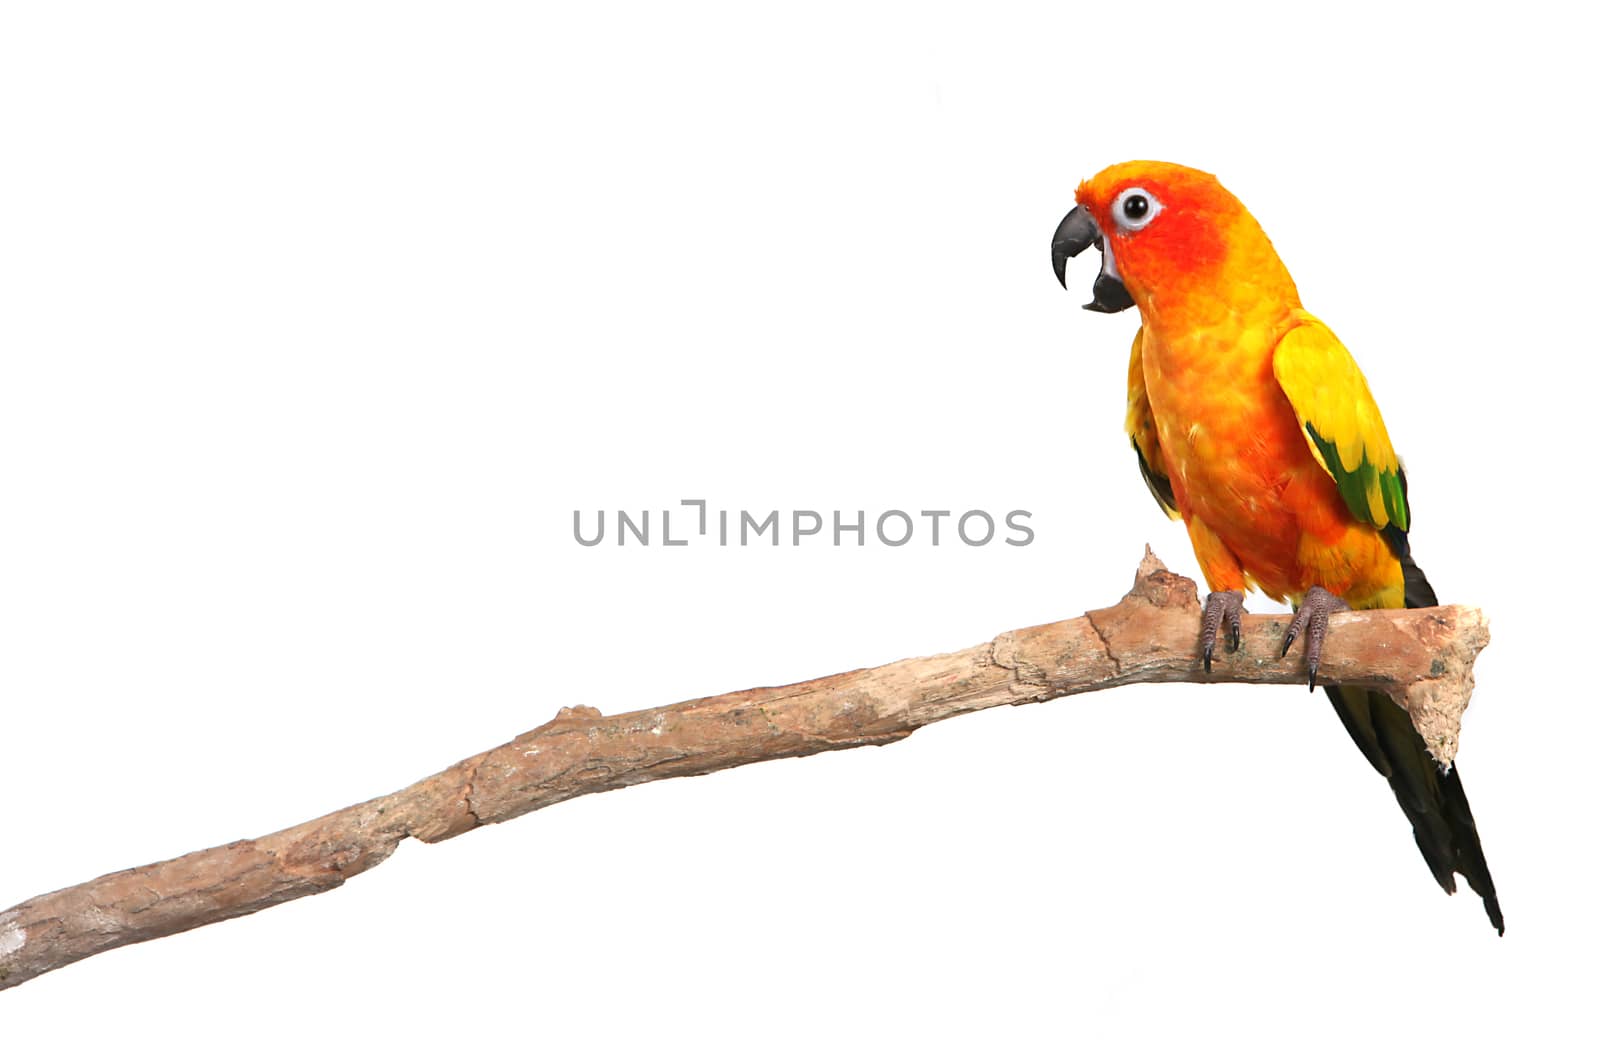 Sun Conure Parrot Screaming on a Branch With Copy Space on White Background For Easy Extraction